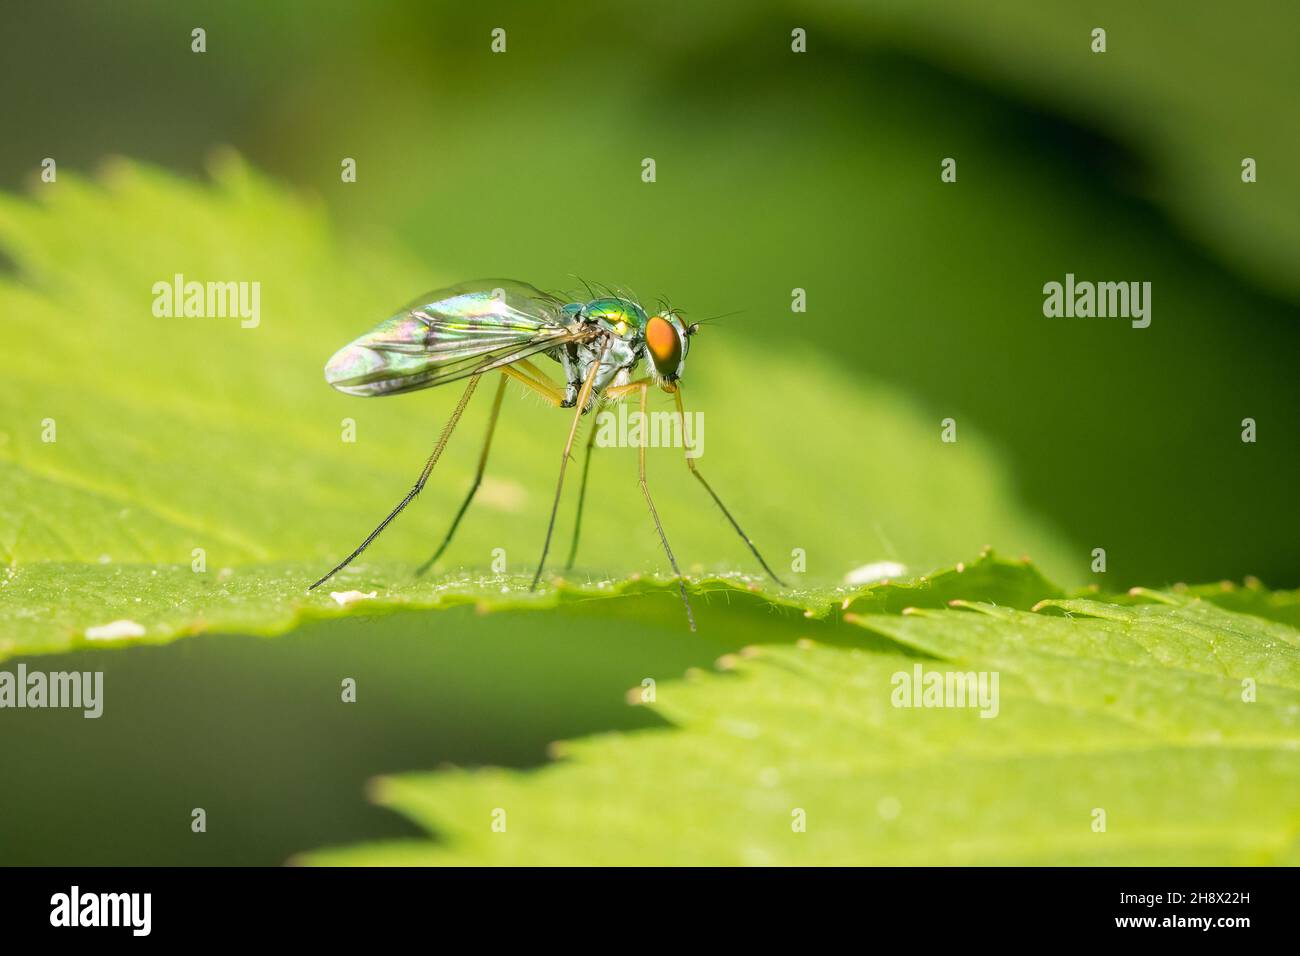 Small Dolichopodidae fly looking for a prey on a green leaf and blurred background Stock Photo